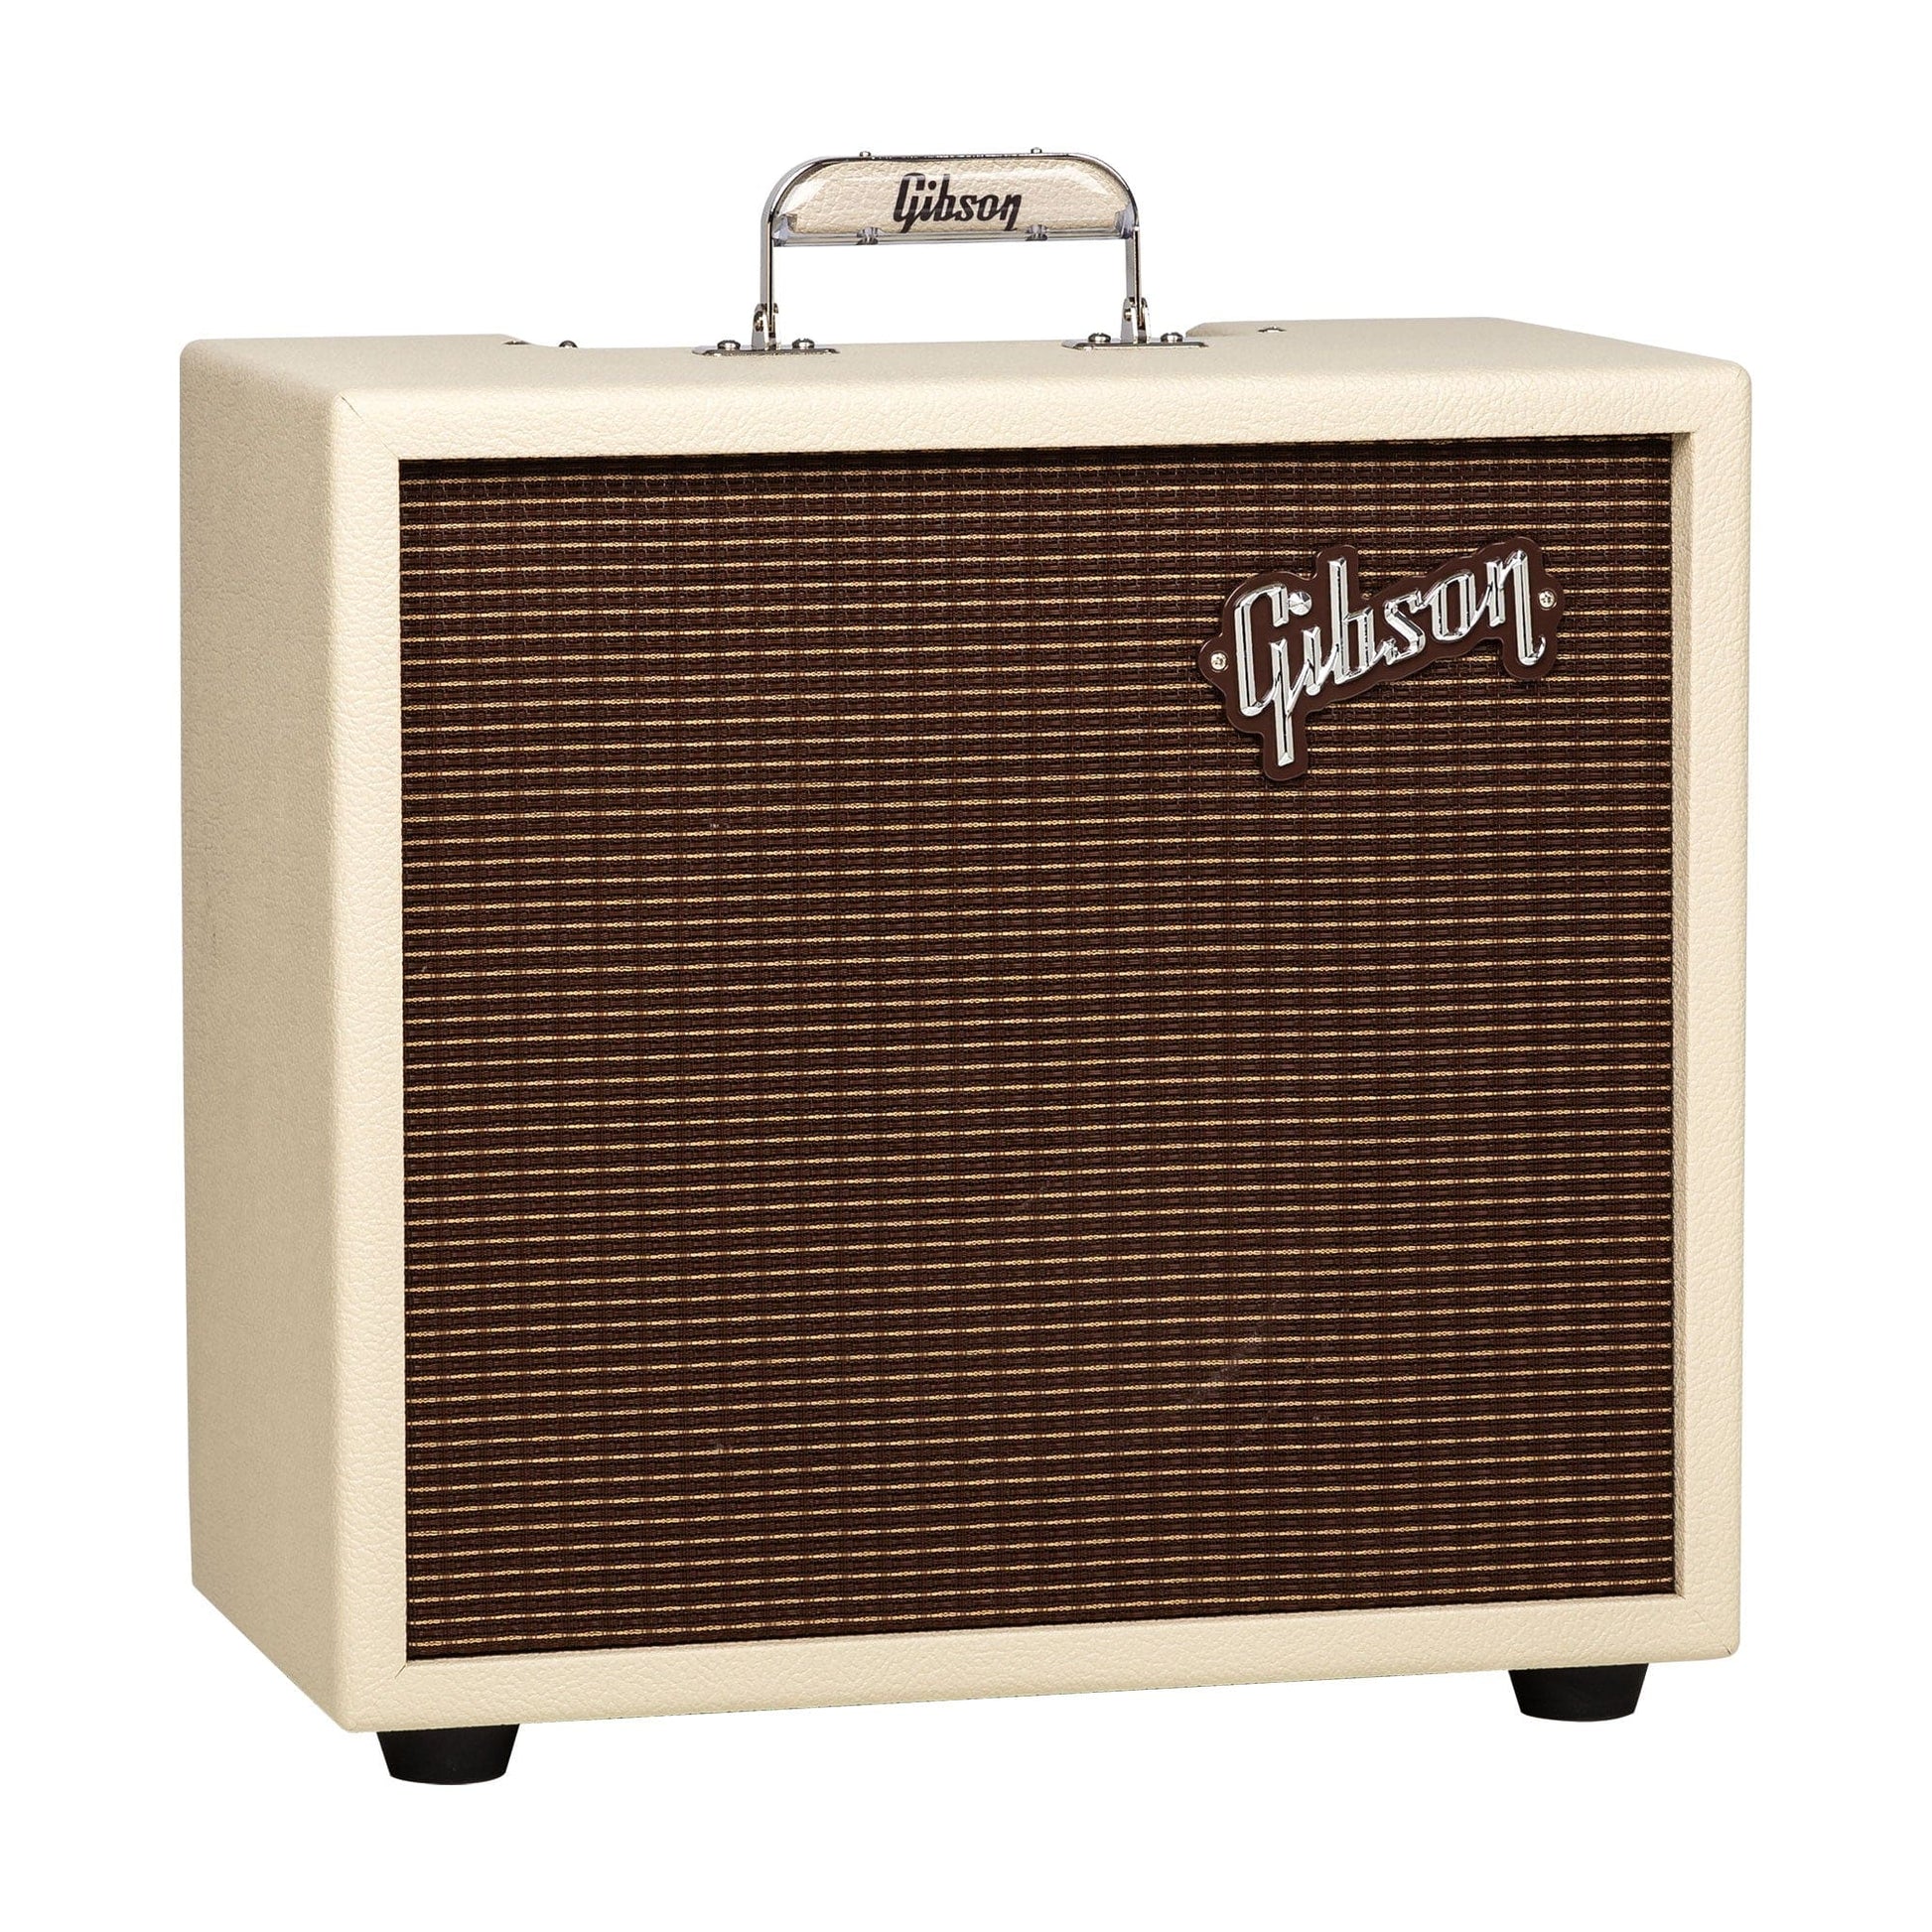 Gibson Falcon 5 5w 1x10 Combo Amp Amps / Guitar Combos